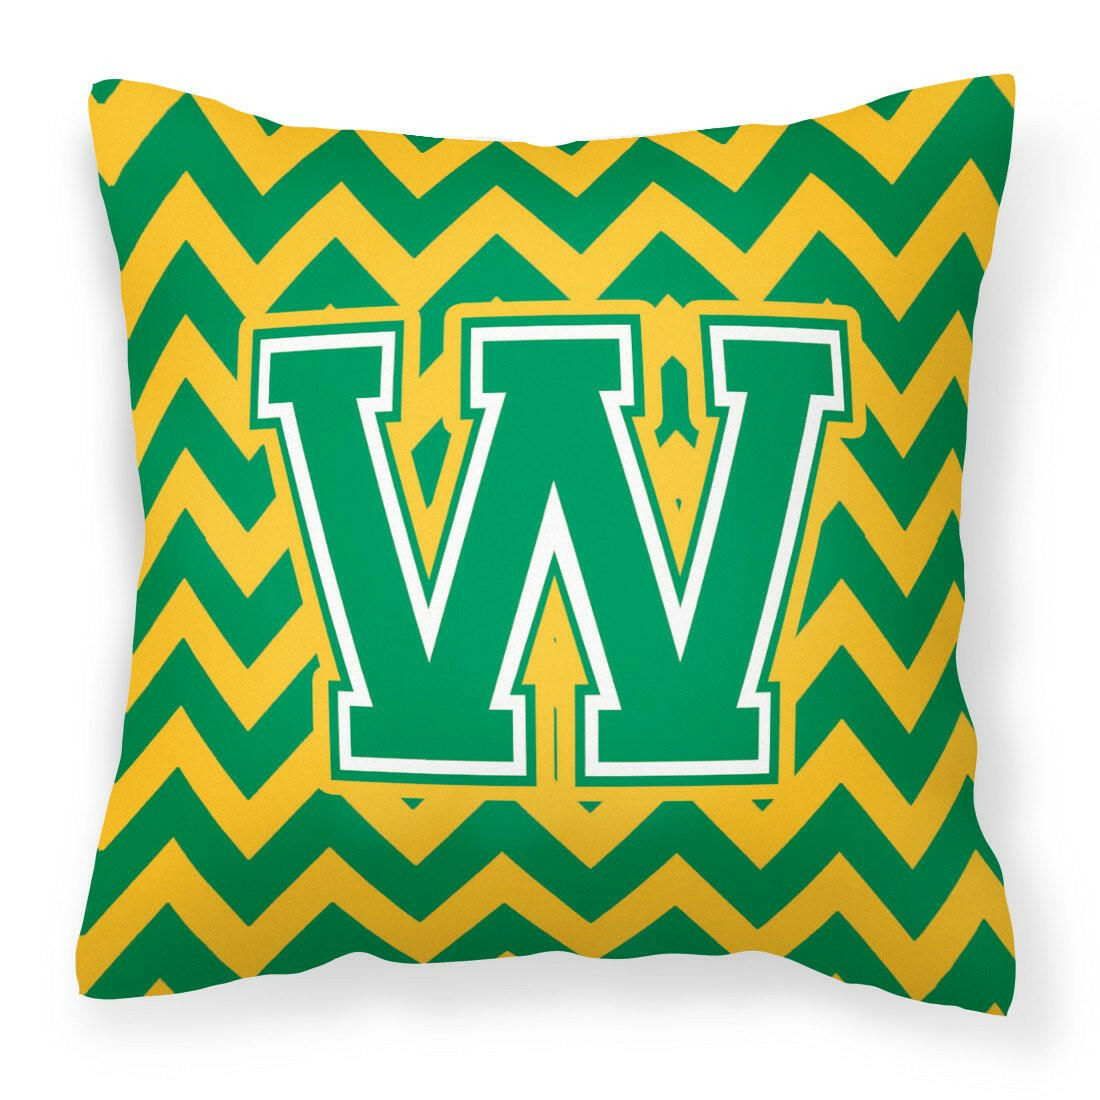 Letter W Chevron Green and Gold Fabric Decorative Pillow CJ1059-WPW1414 by Caroline's Treasures